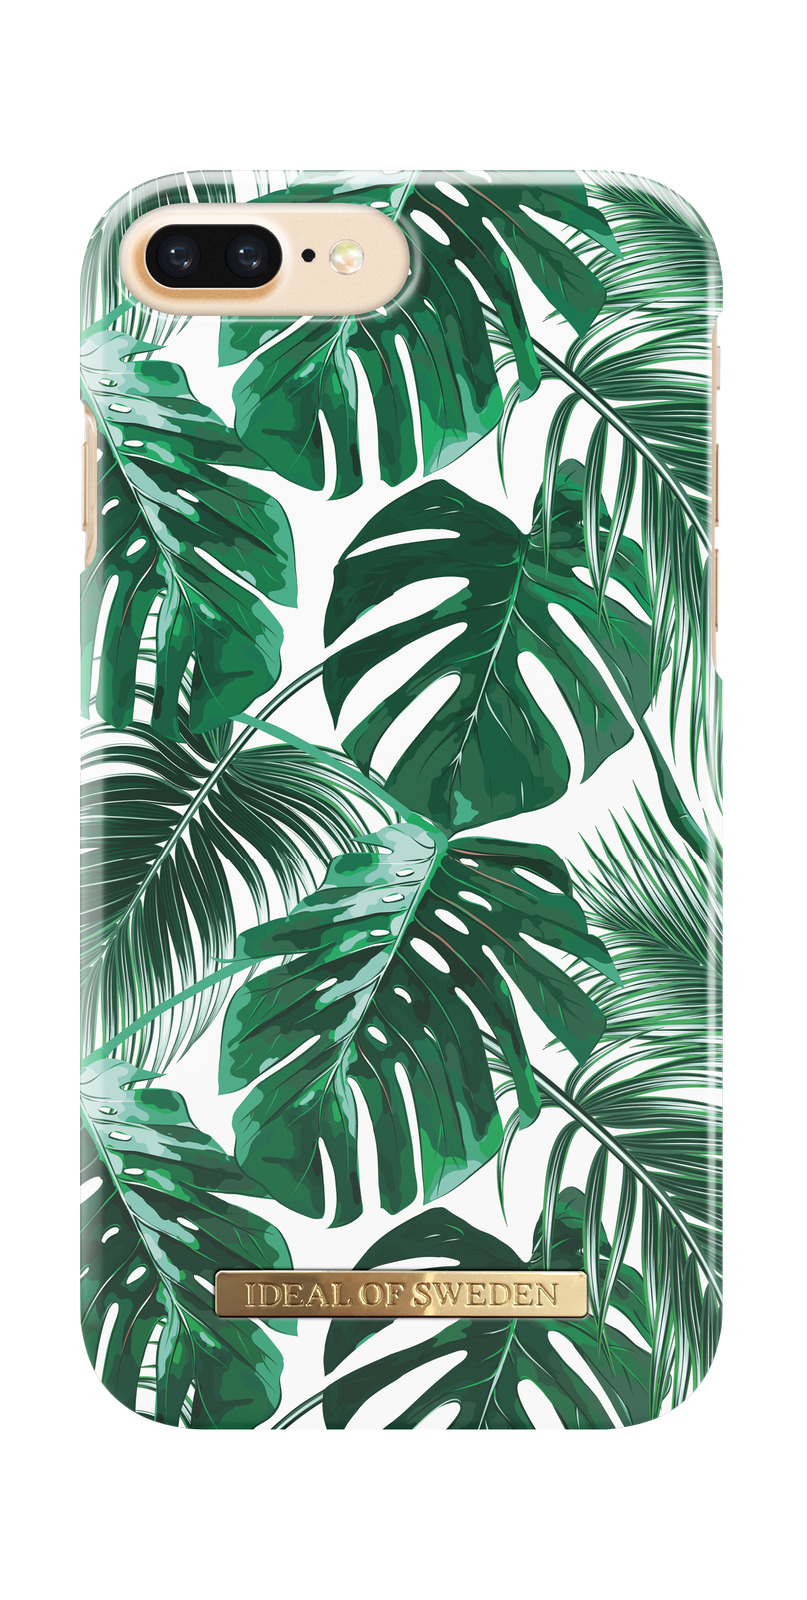 Plus Fashion, Apple, Backcover, iPhone Plus, OF ,iPhone Monstera iPhone 7 Jungle IDEAL Plus, SWEDEN 6 8